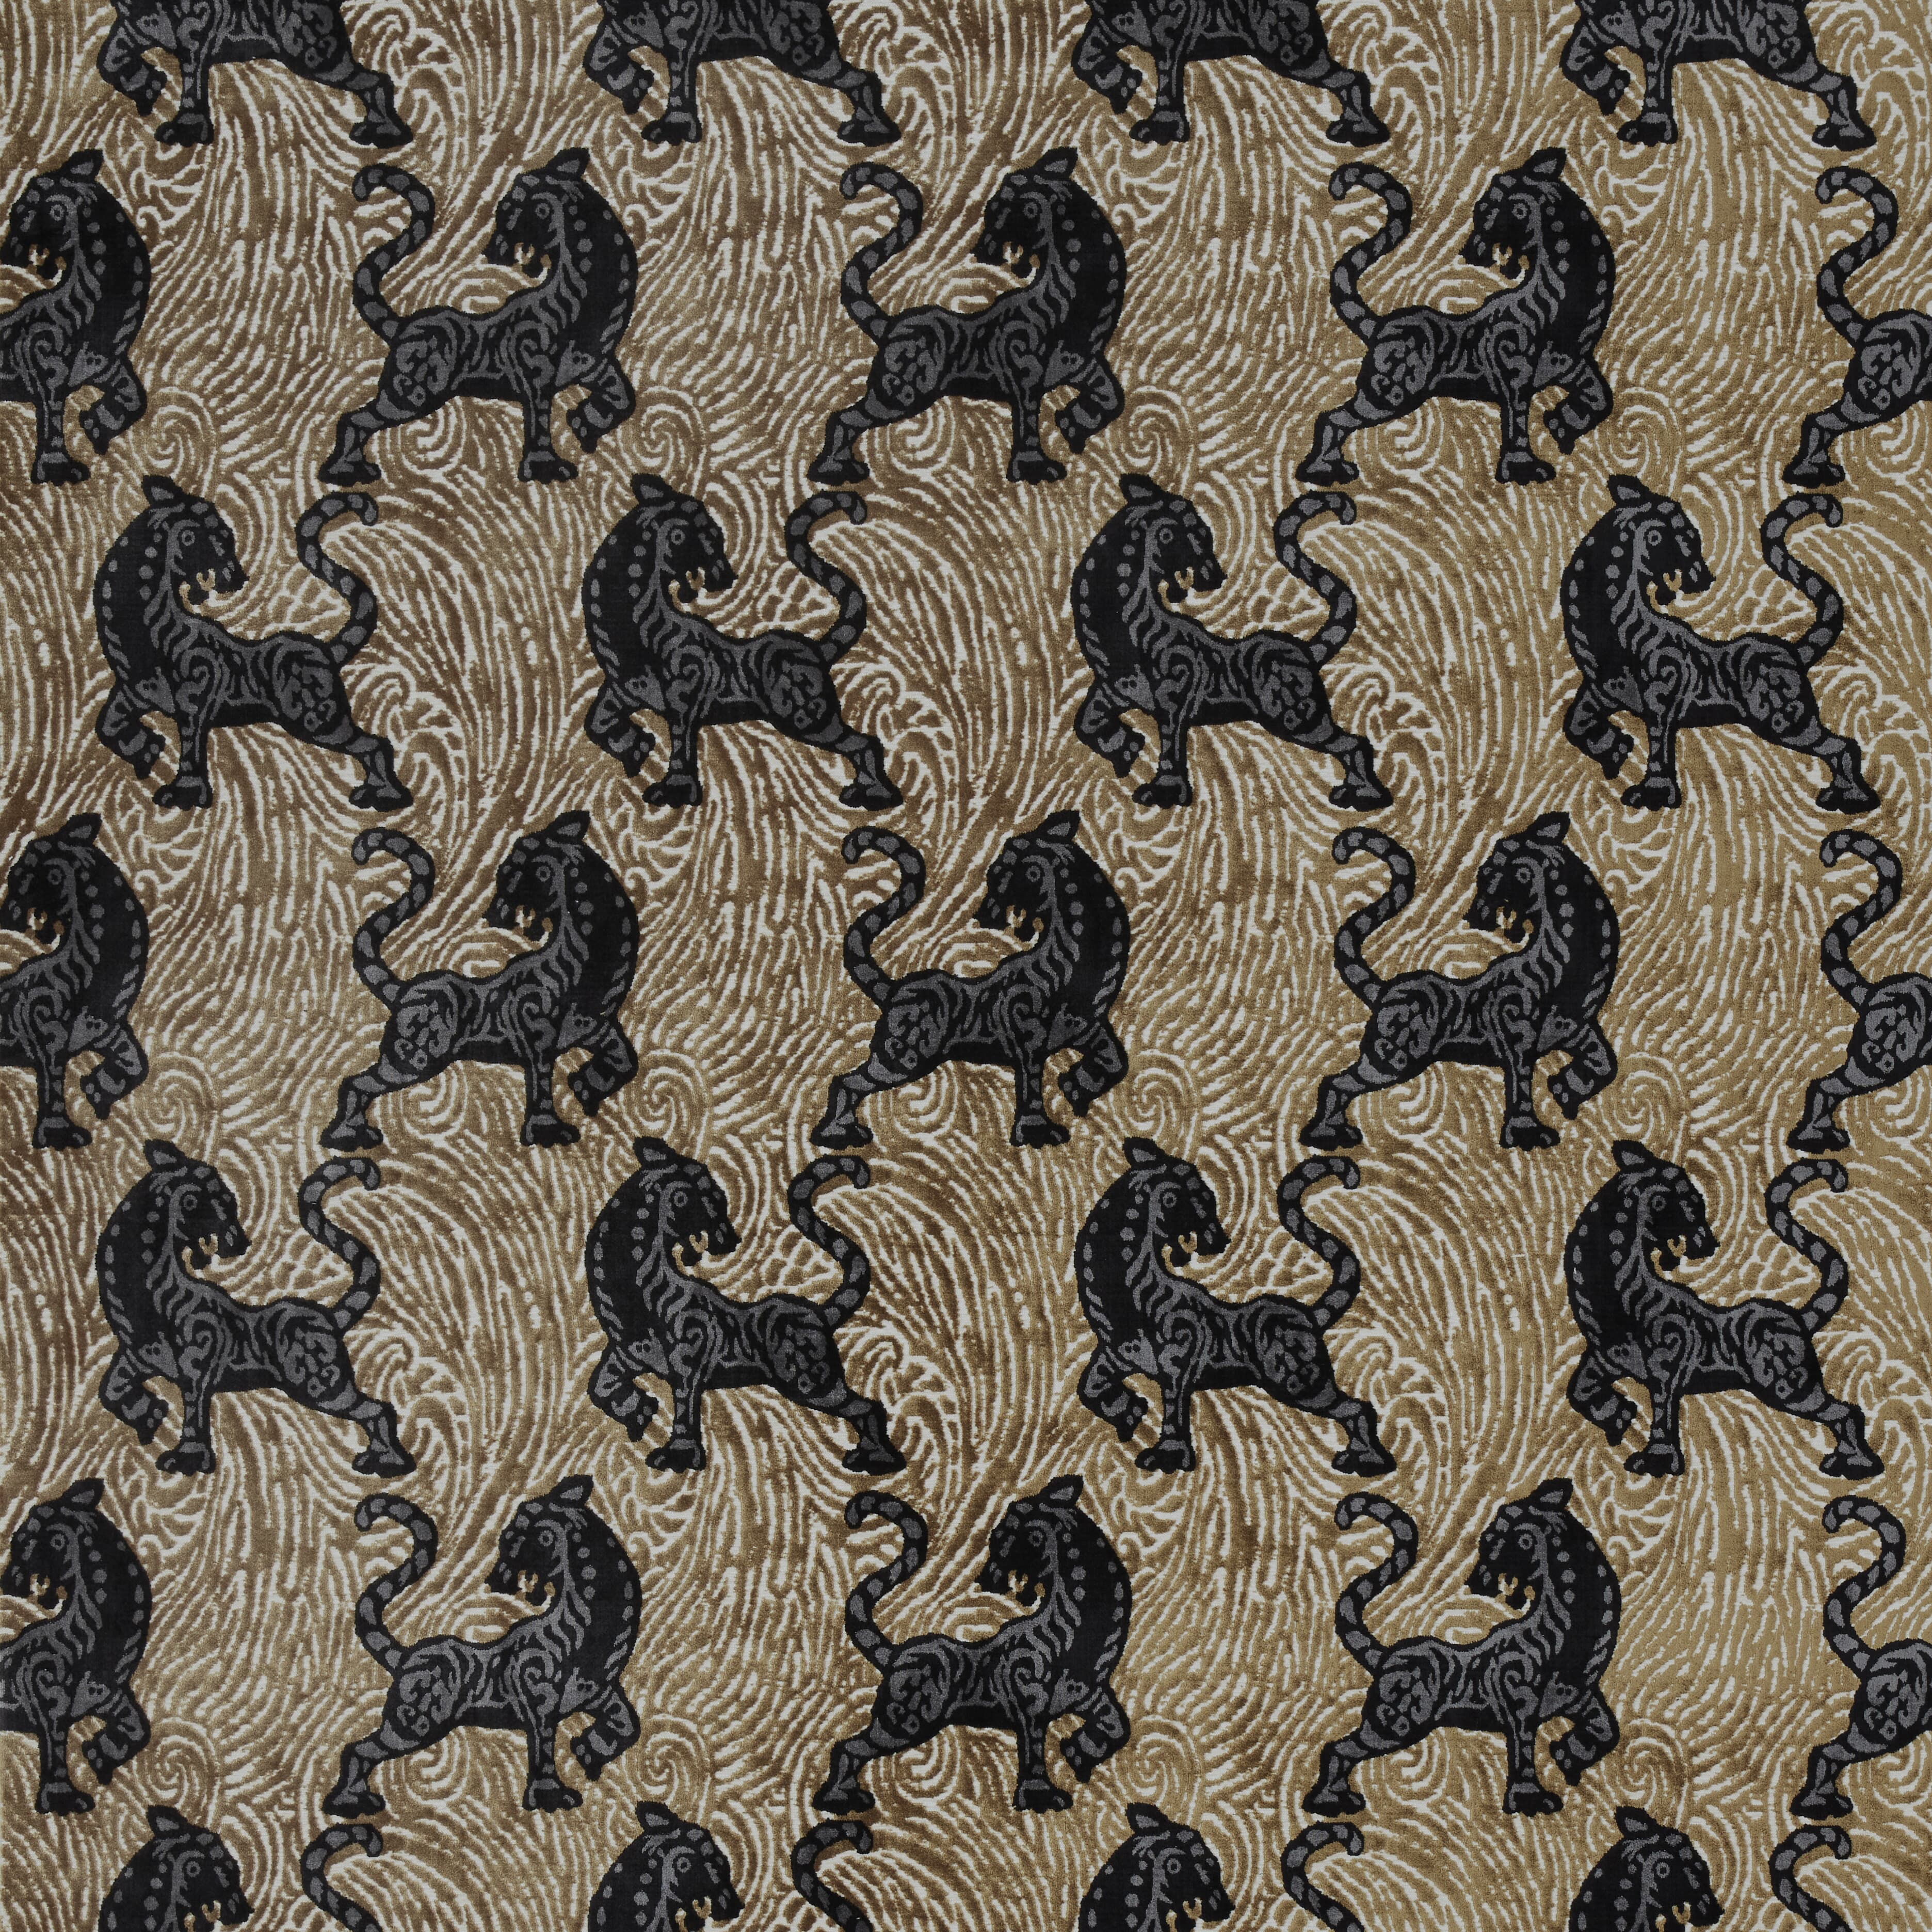 Africa 1 Cognac by Stout Fabric